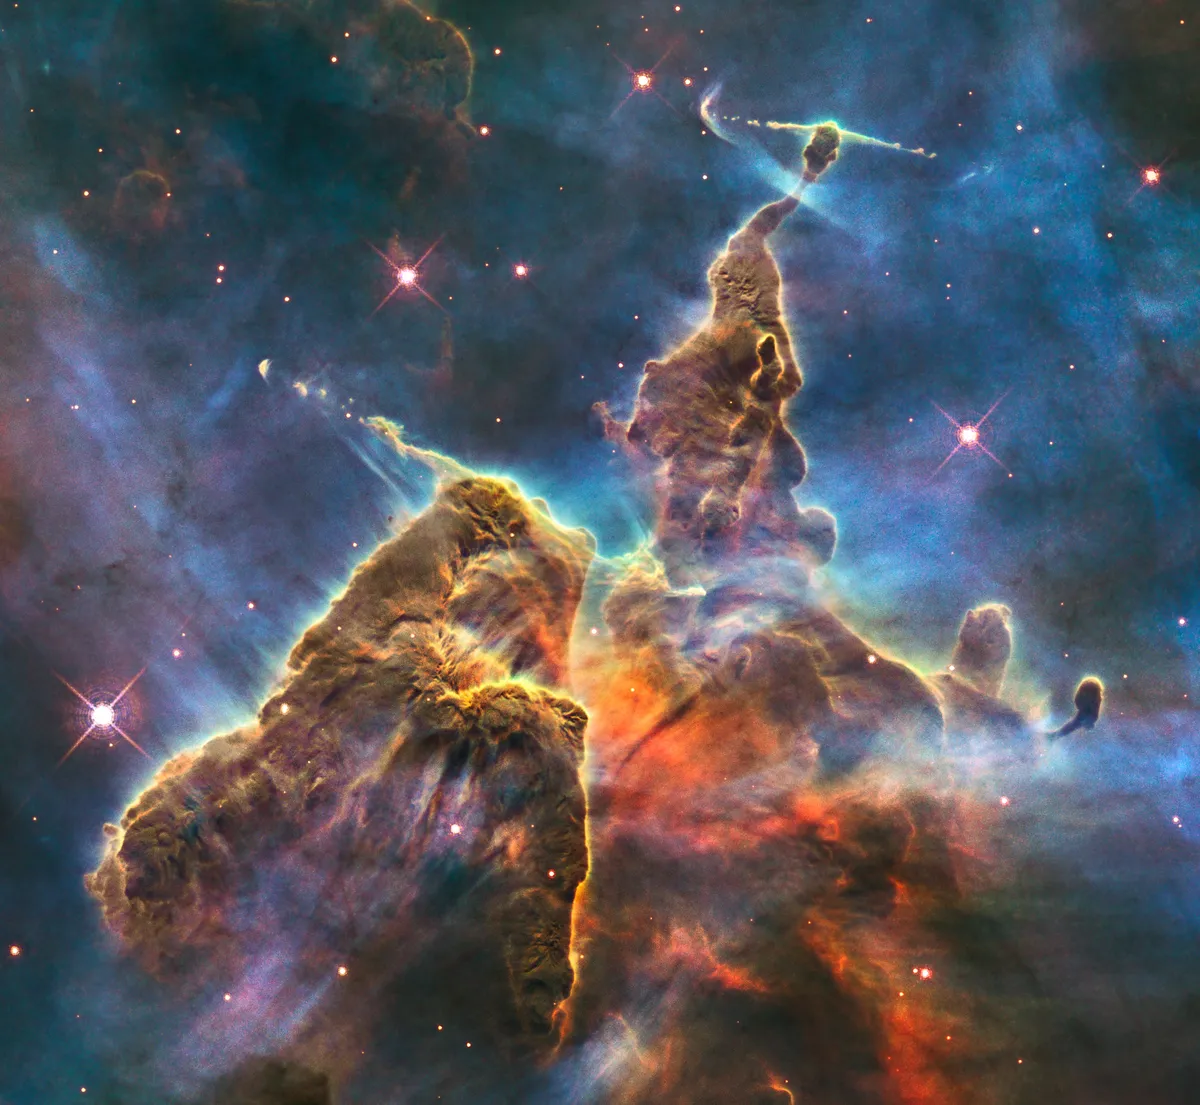 Carina Nebula 23 April 2010. Hubble captures the turbulent cosmic pinnacle within a tempestuous stellar nursery called the Carina Nebula. Stacks of gas and dust, ‘Pillars of Creation’, are three lightyears tall. Credit: NASA, ESA, M. Livio Hubble 20th Anniversary Team (STScI)